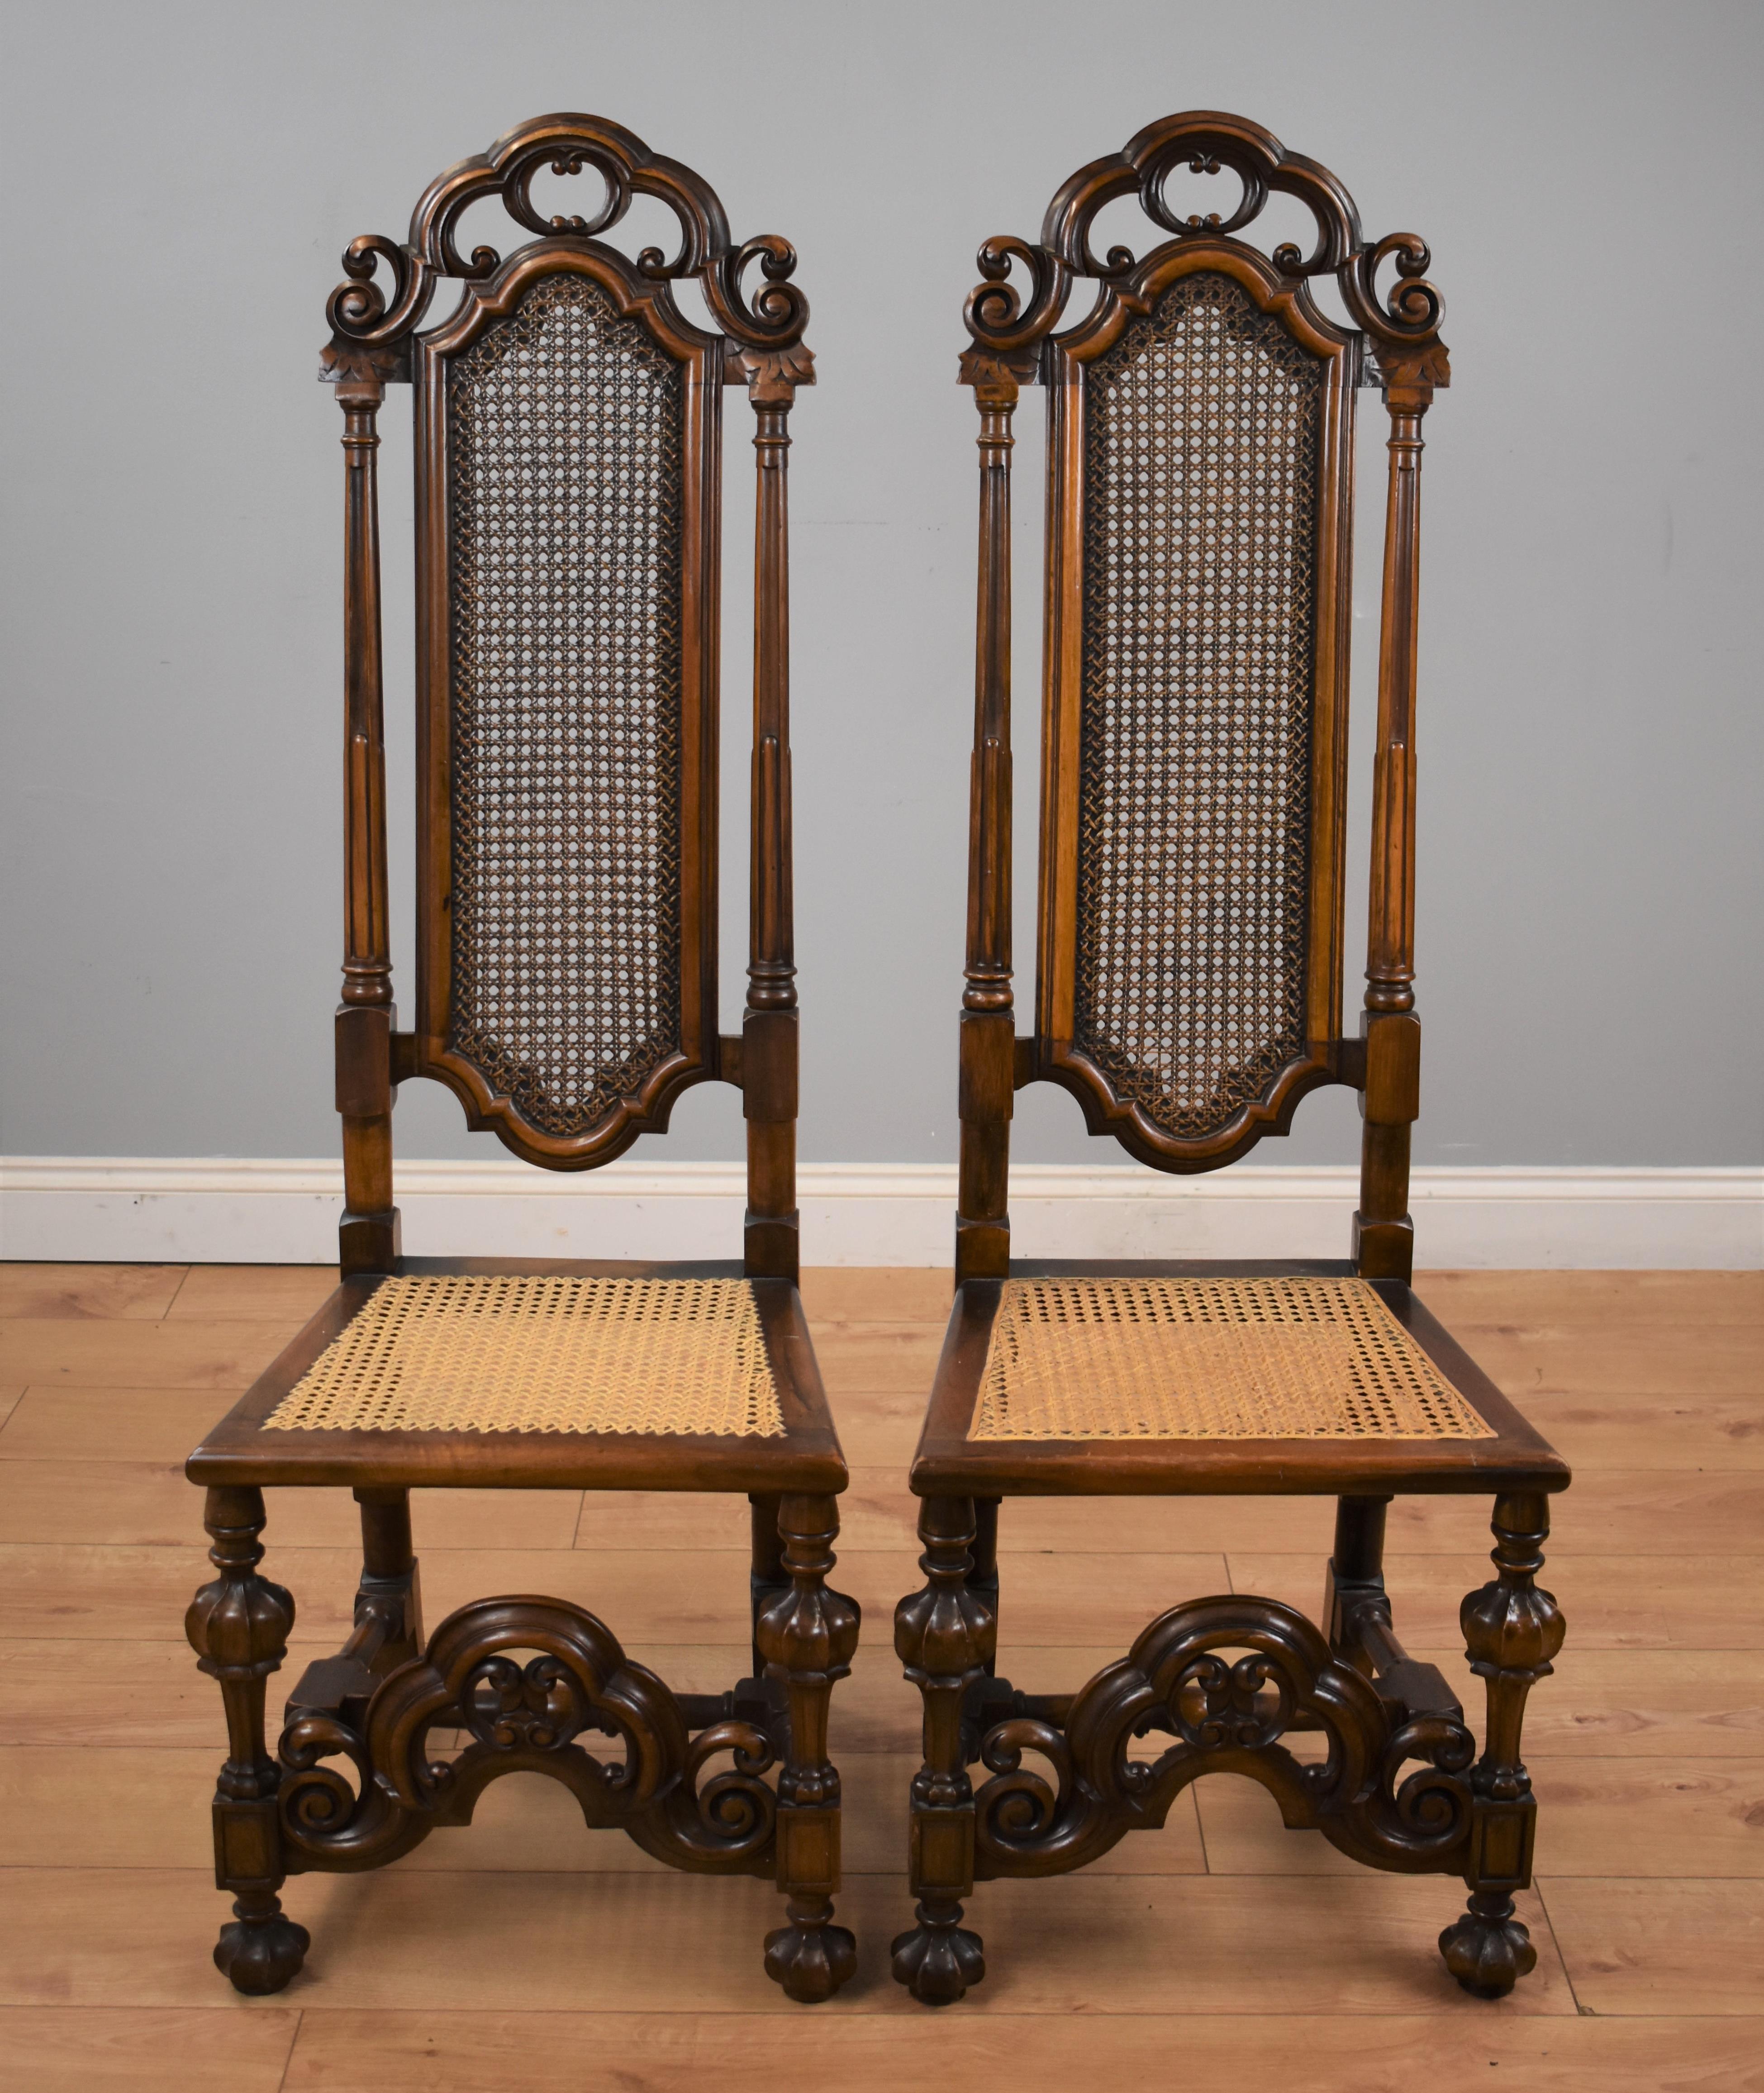 Pair of Carolean style walnut high back chairs with cane work seats and back panel with carved lower rail.